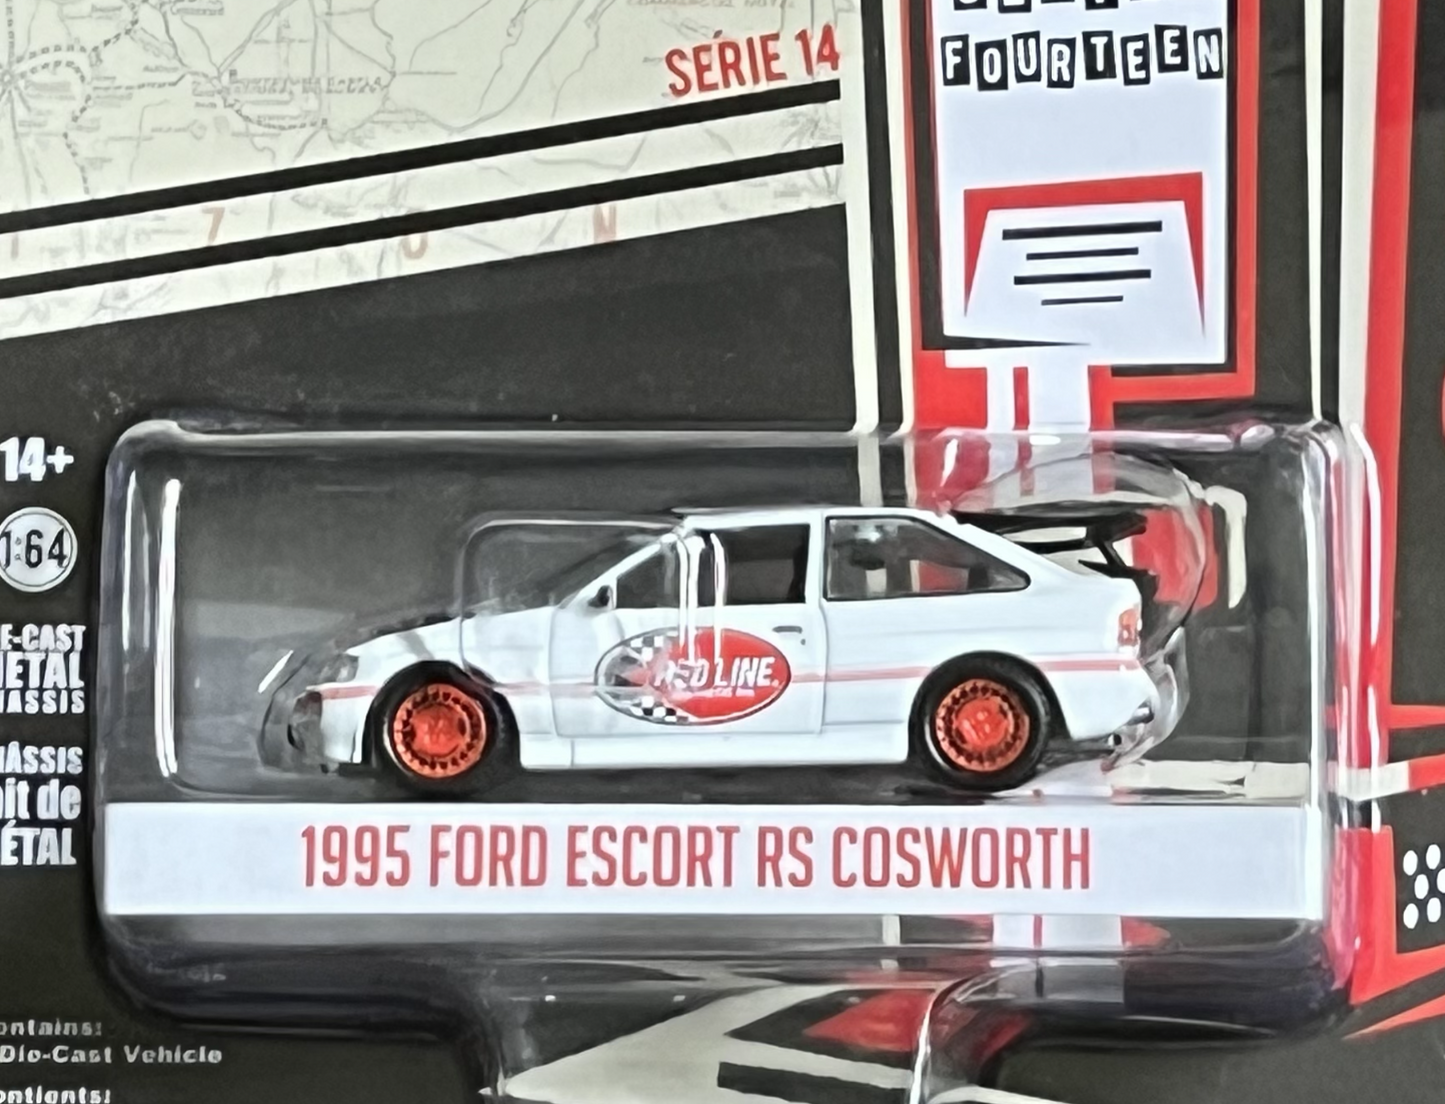 Greenlight Running on Empty Series 14 1995 Ford Escort RS Cosworth